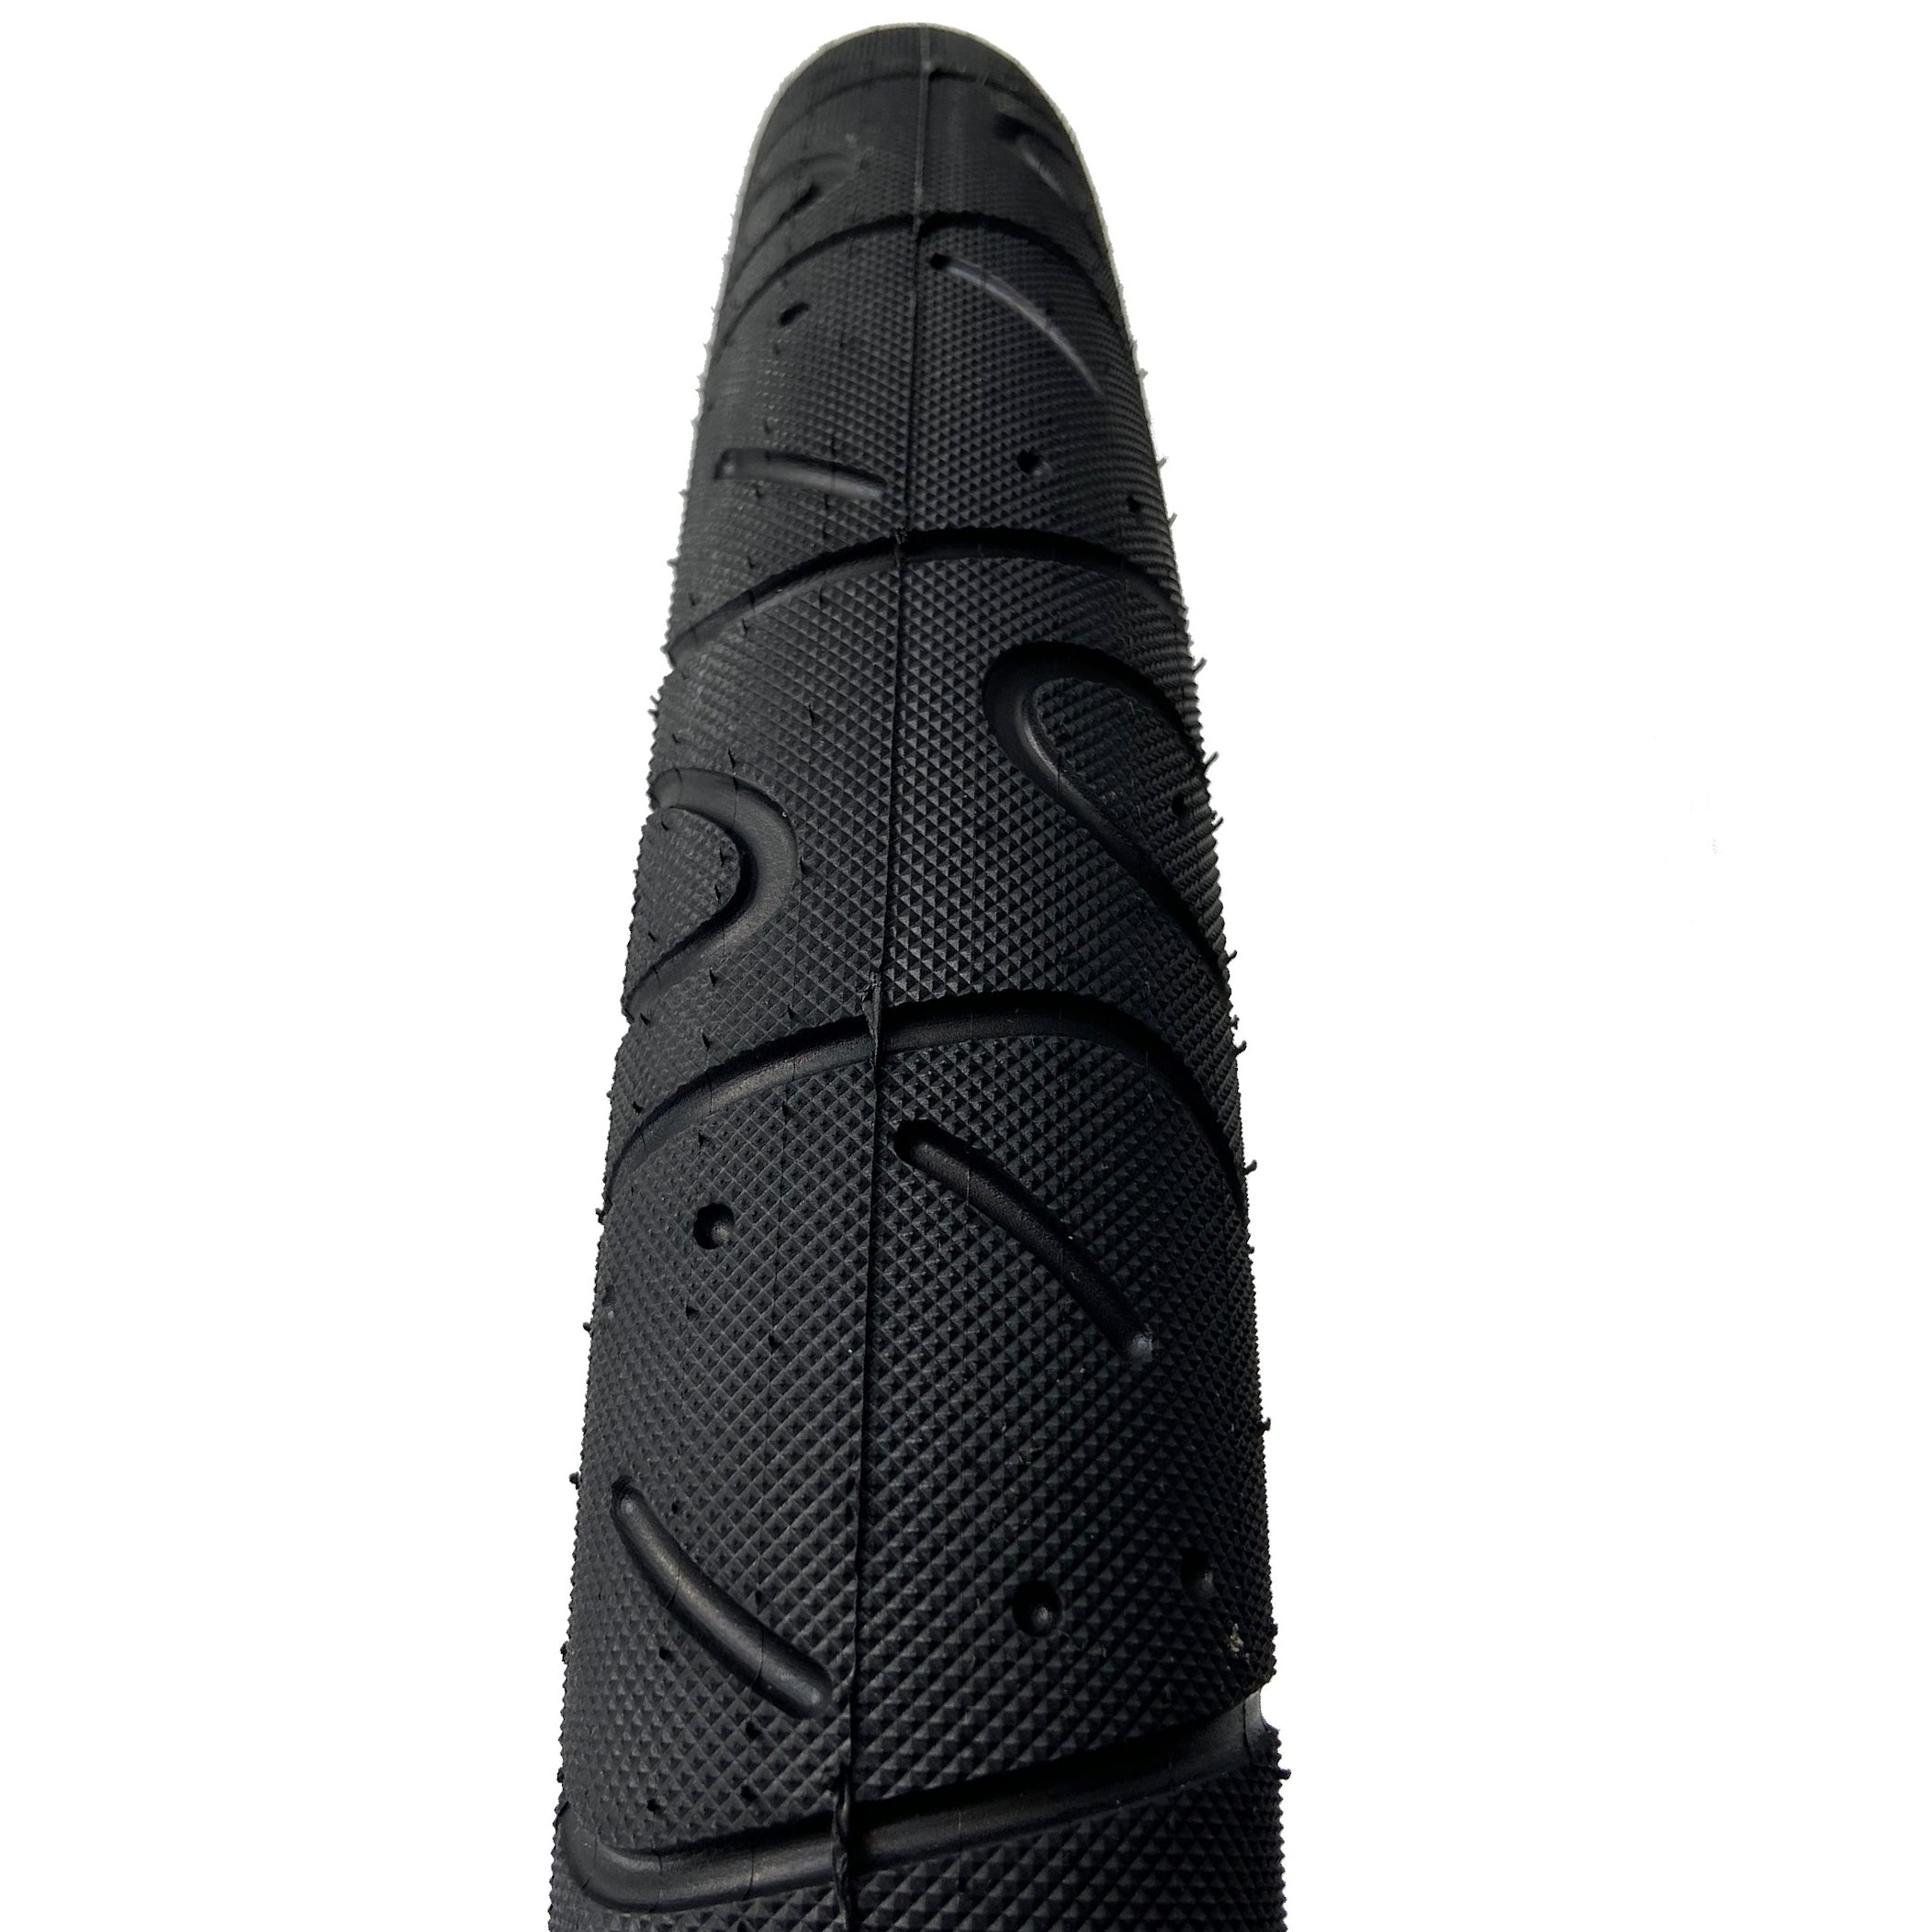 Top view of the Maxxis Hookwork tire showing the tread pattern.